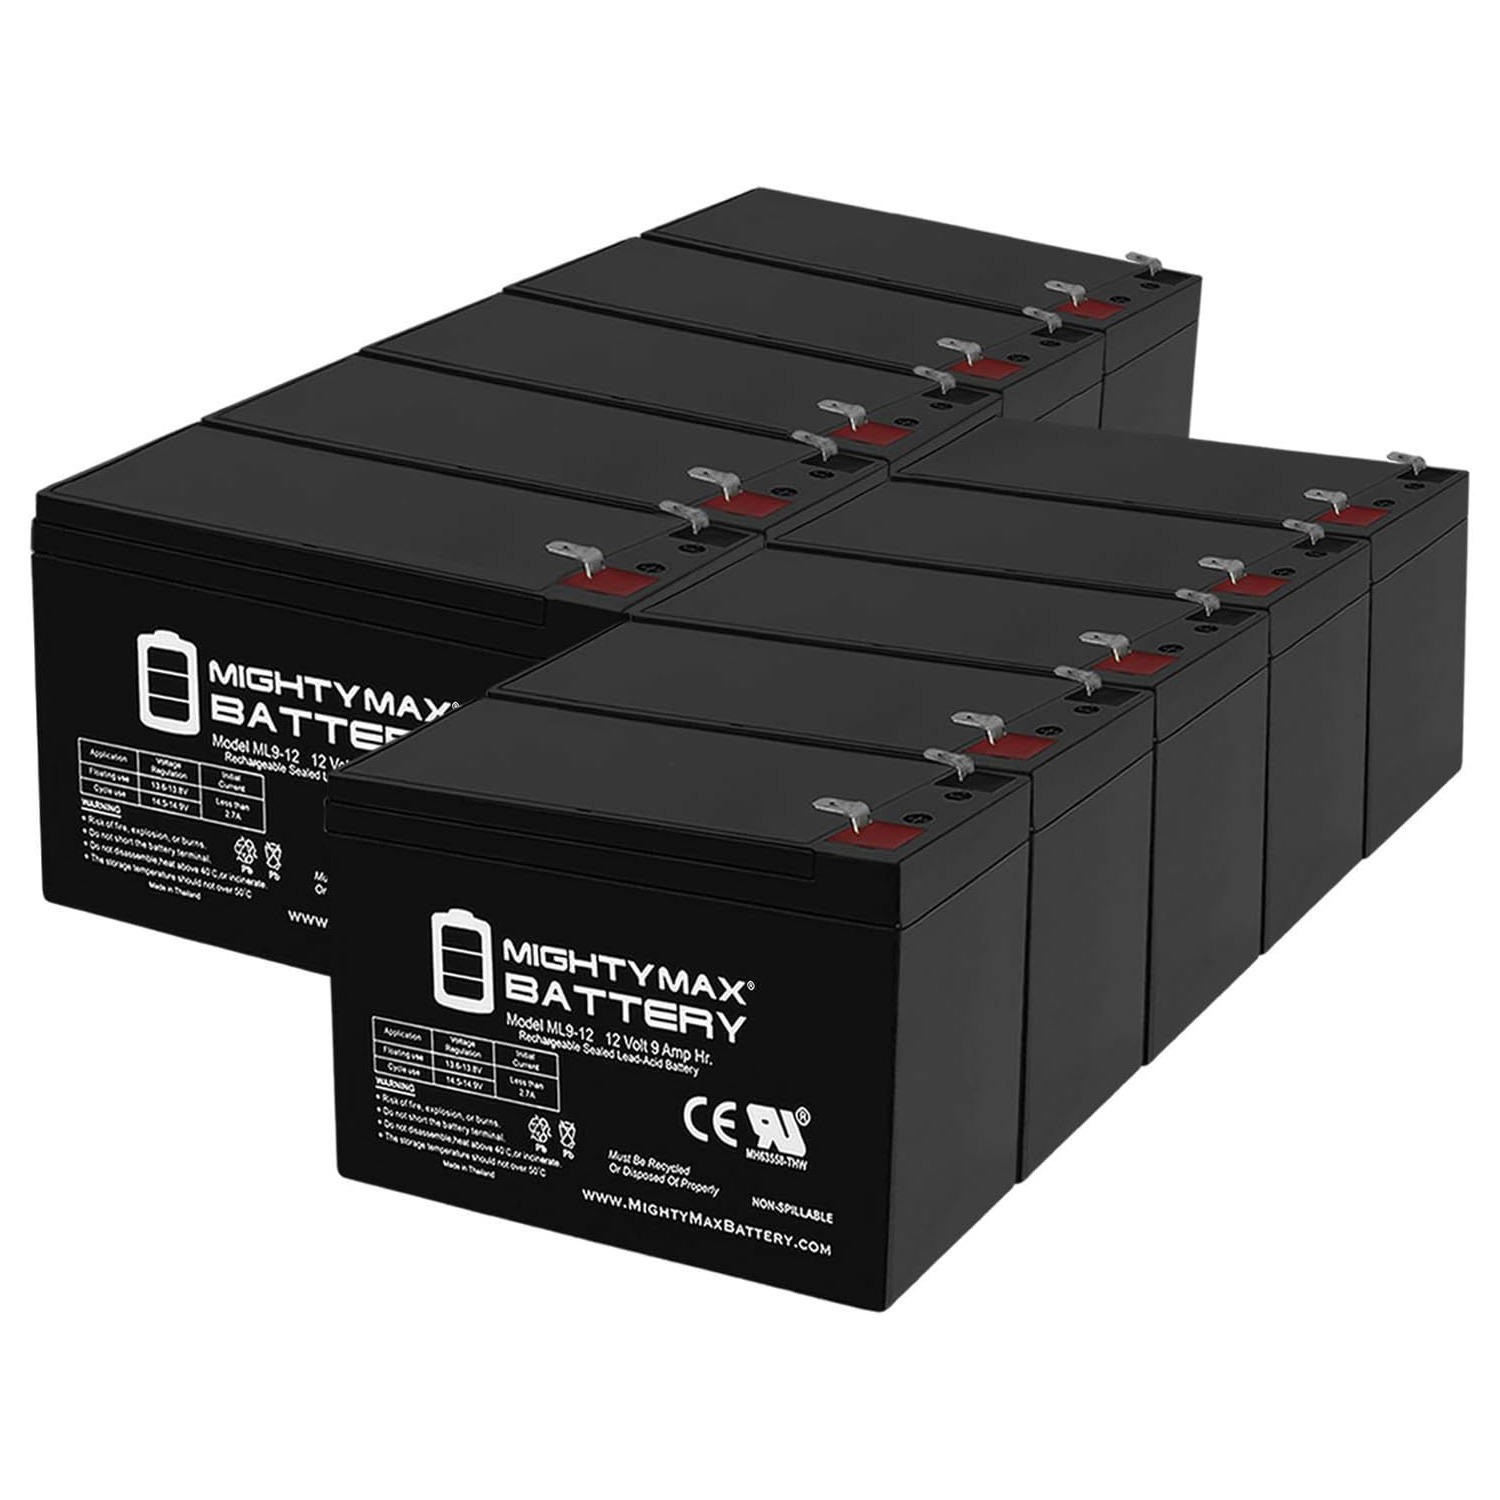 Altronix SMP3PMCTXPD4 12V, 9Ah Lead Acid Battery - 10 Pack